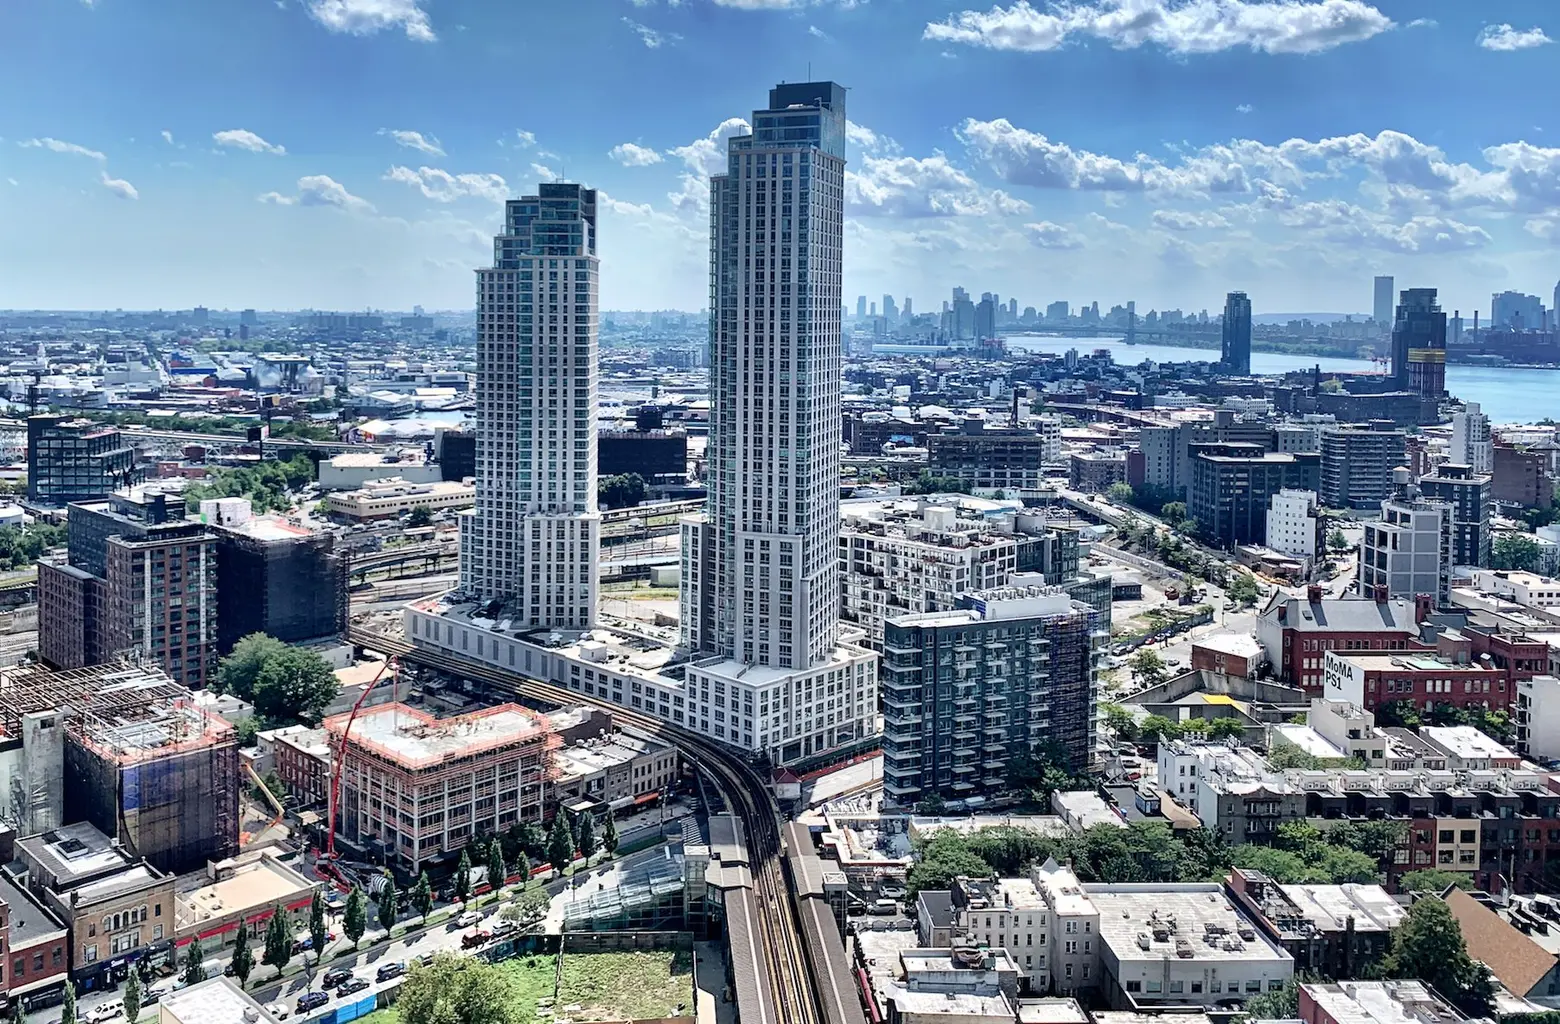 Lottery opens for 330 middle-income units at 5Pointz towers in Long Island City, from $1,850/month